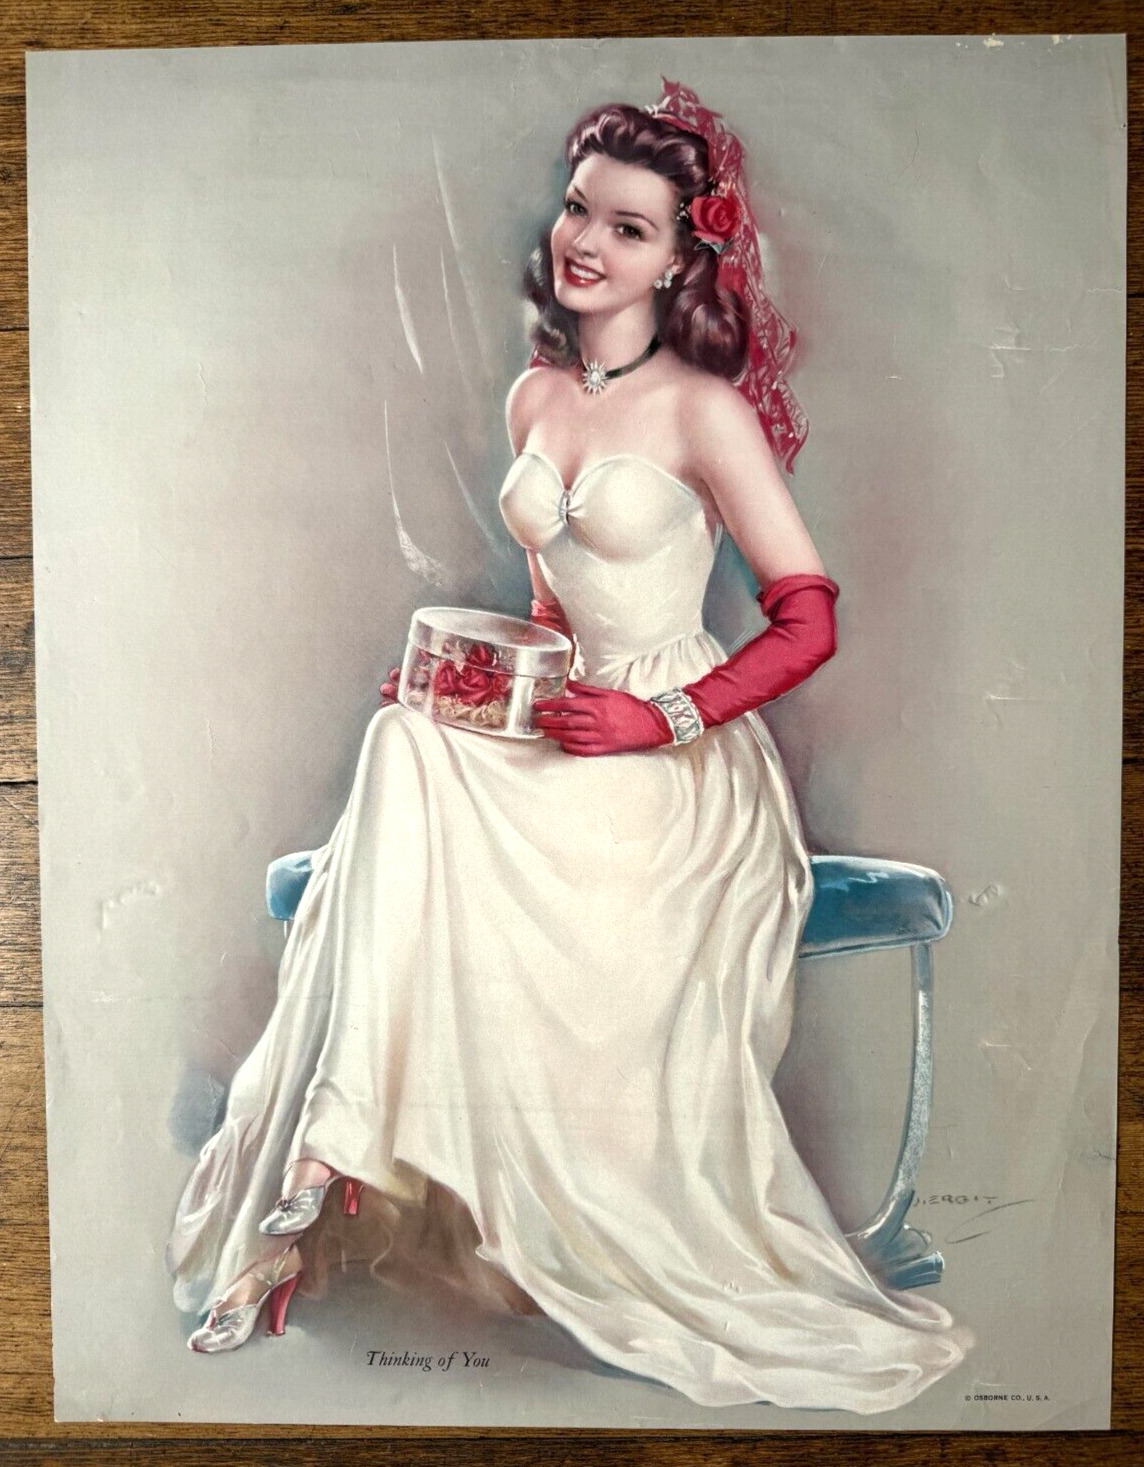 1940's Pinup Girl Picture Woman In Formal White Dress w/ Corsage by Erbit